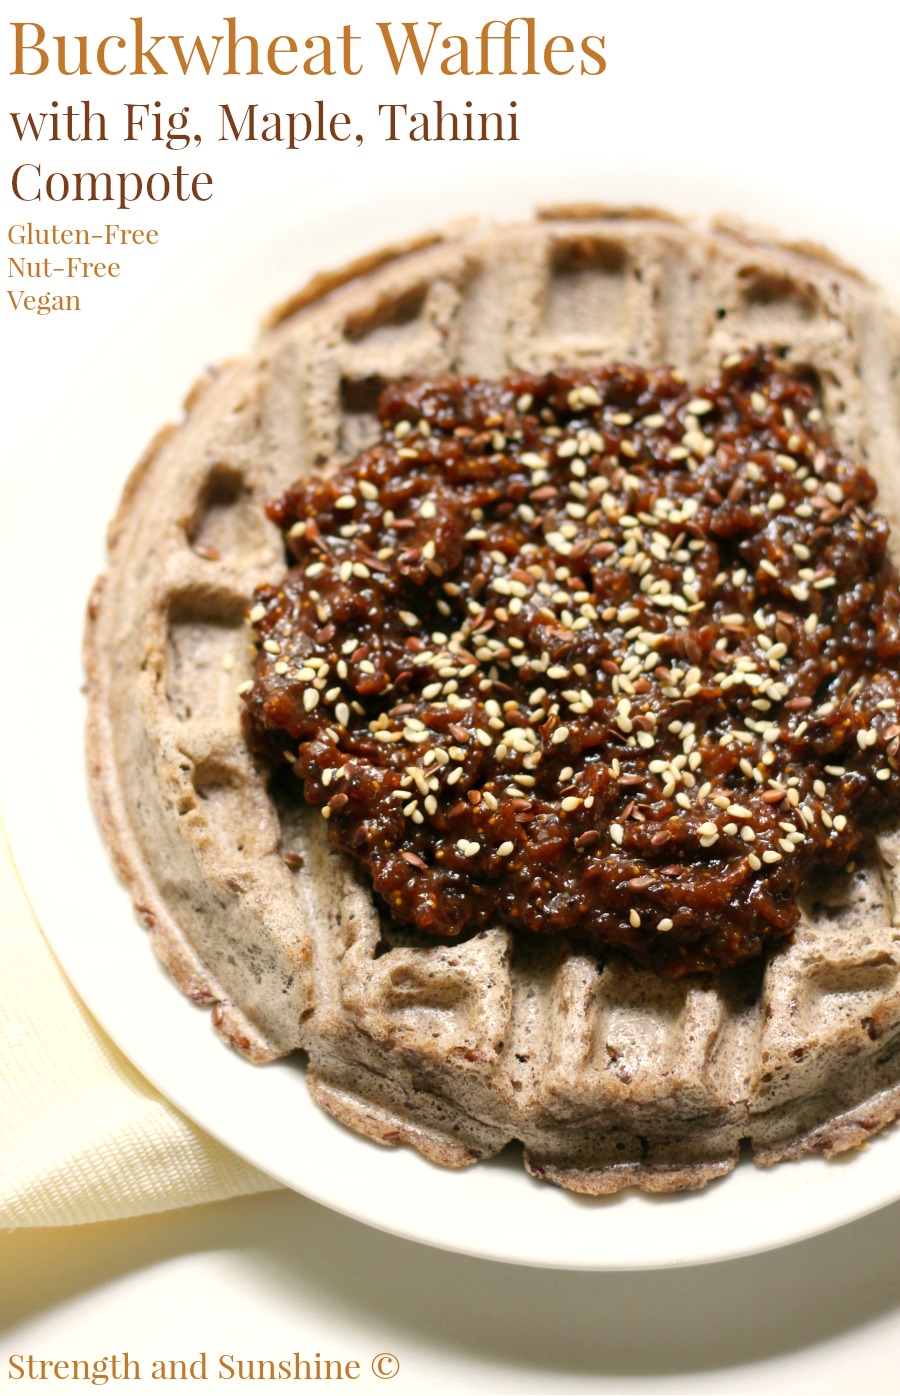 Buckwheat Waffles with Fig, Maple, Tahini Compote | Strength and Sunshine @RebeccaGF666 Simple gluten-free, nut-free, vegan buckwheat waffles with a full-flavored fig, maple, tahini compote to take this breakfast over the top! These waffles will be your new favorite weekend breakfast or brunch recipe!